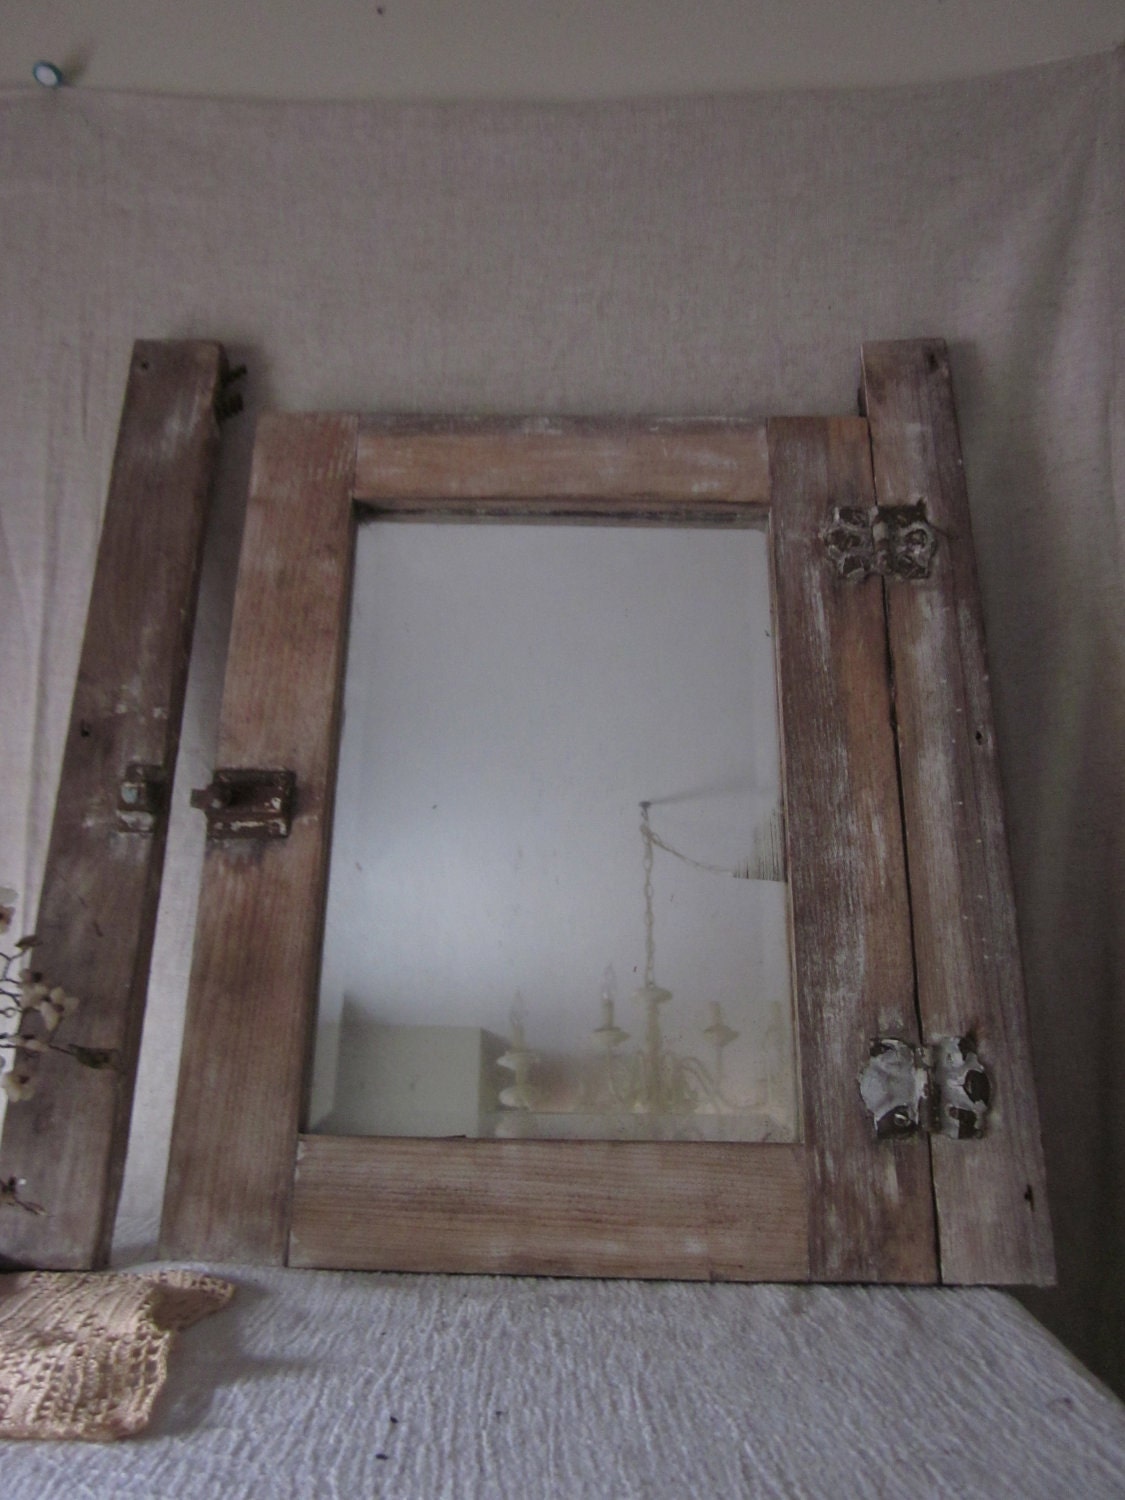 Mirror Cabinet Antique medicine Etsy  Medicine vintage Shabbylull with on by mirrors cabinets Door